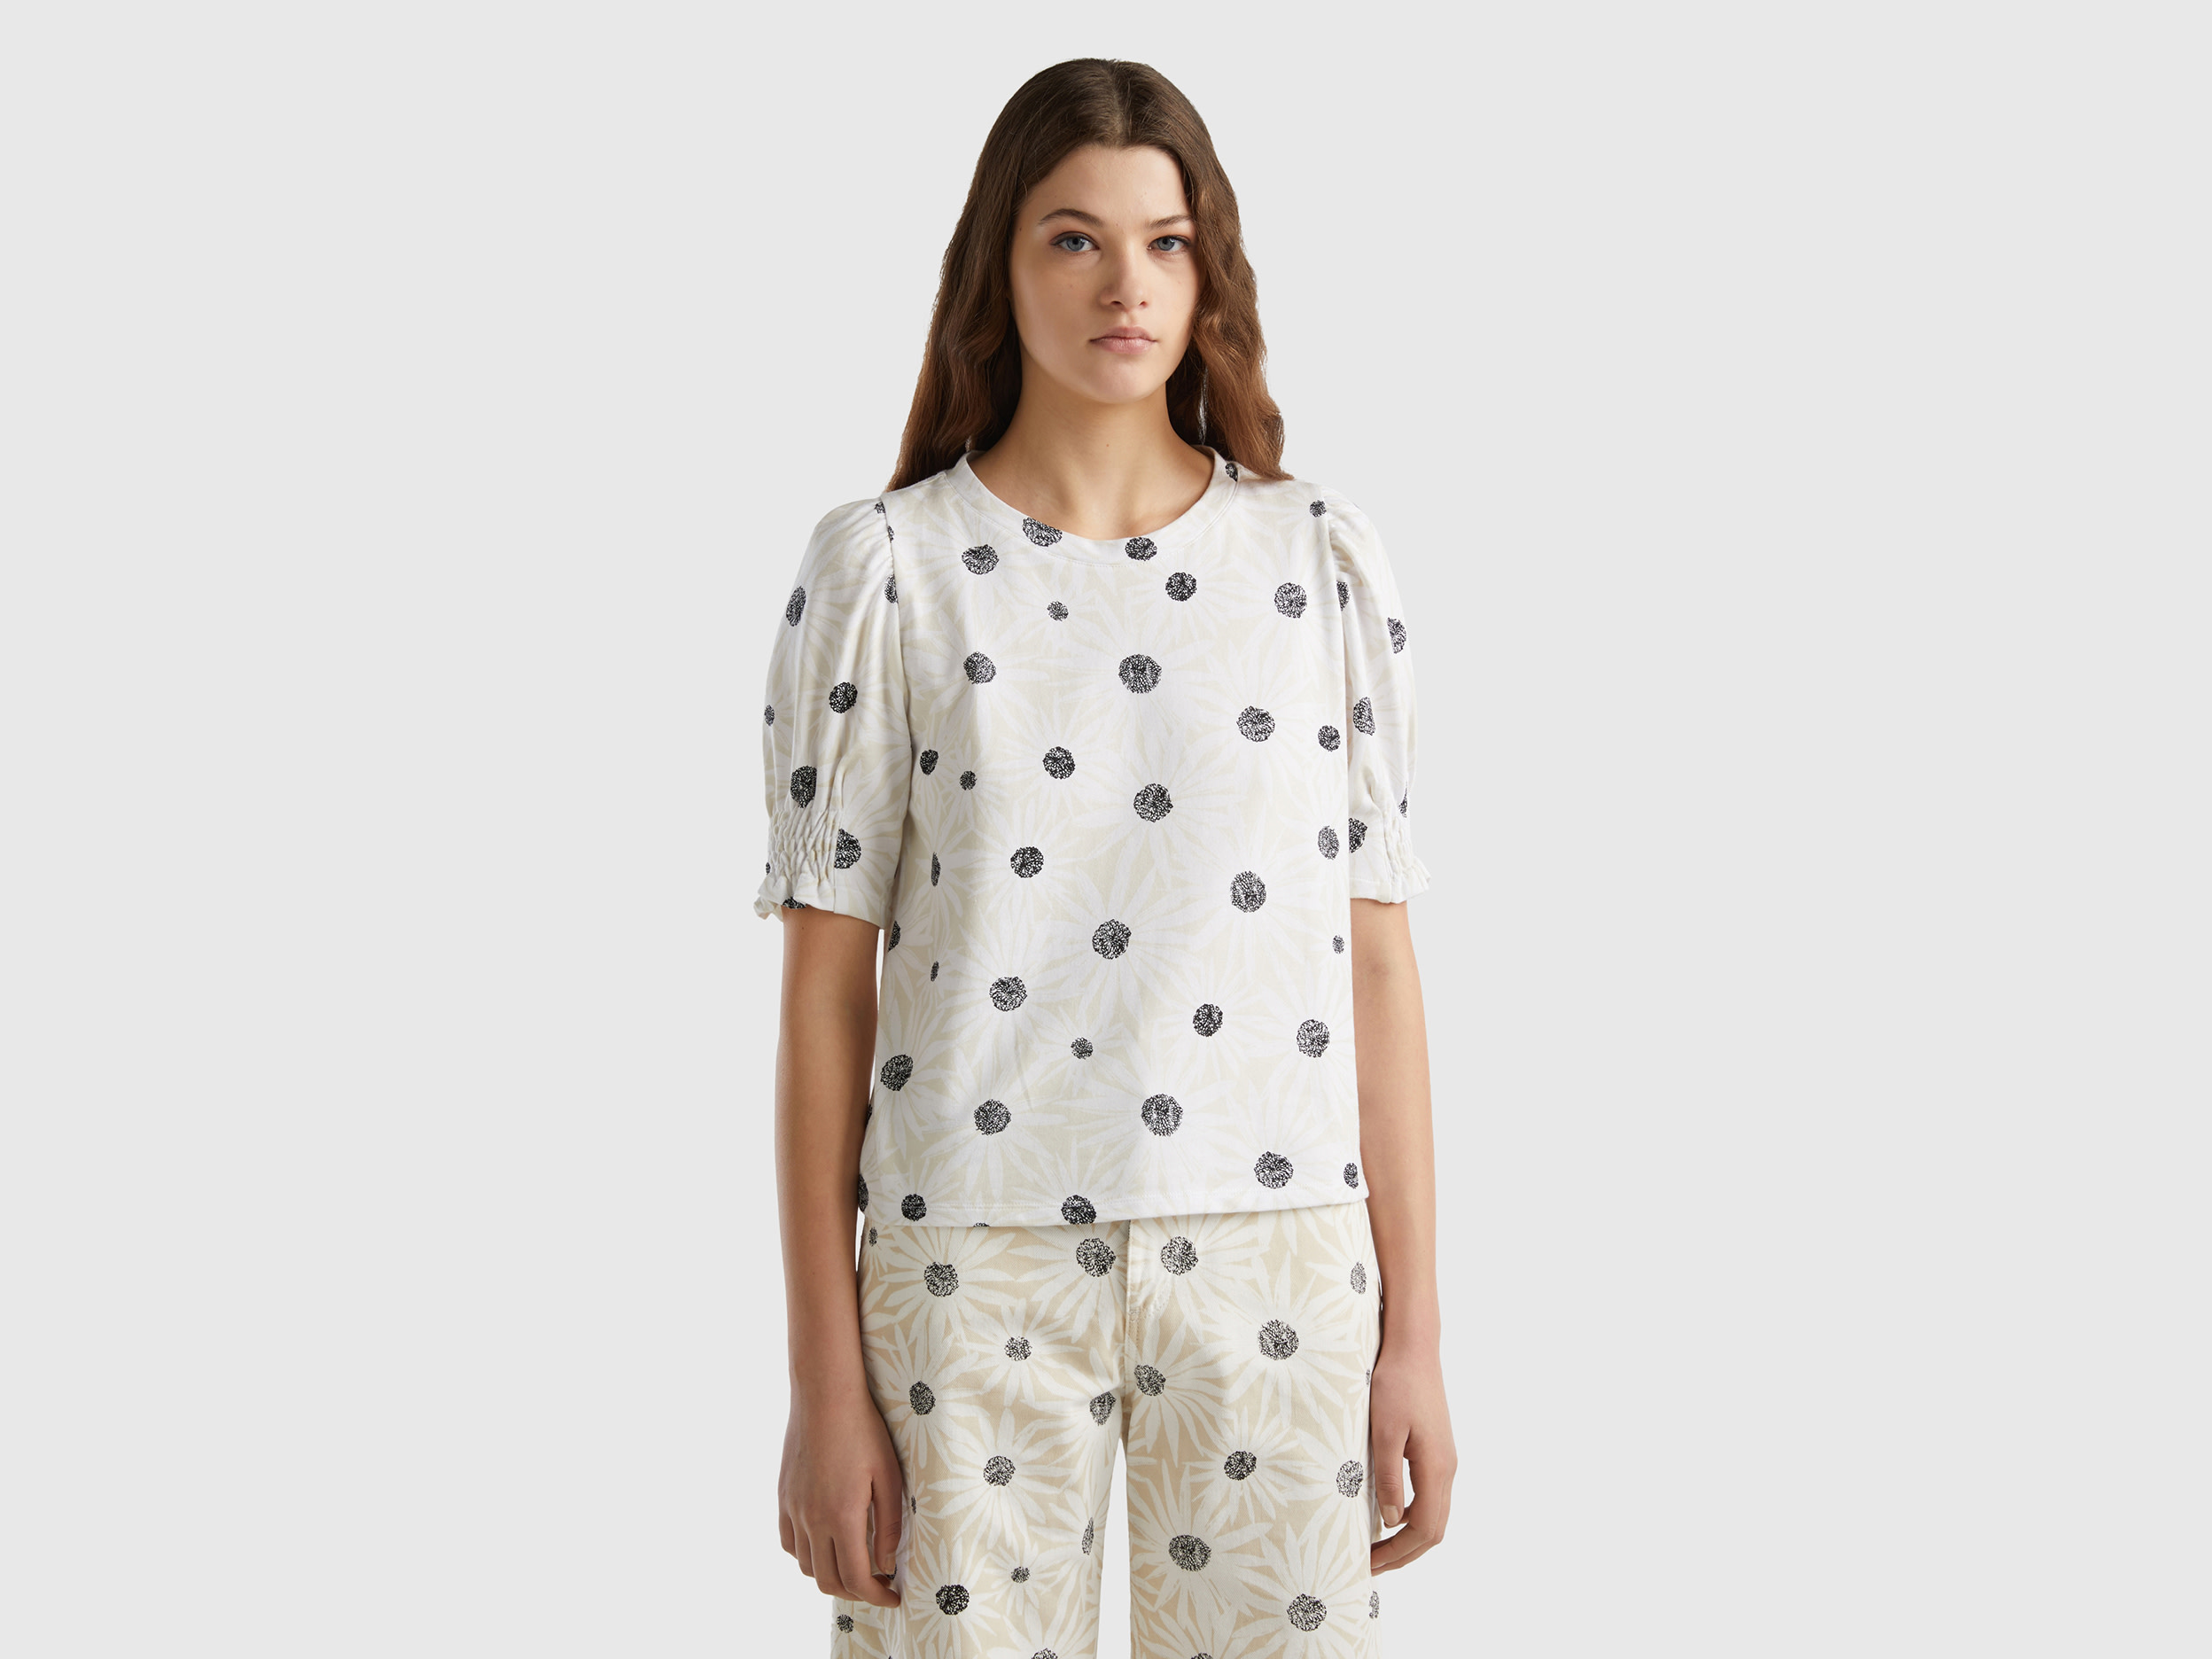 Image of Benetton, Organic Cotton T-shirt With Floral Print, size M, White, Women